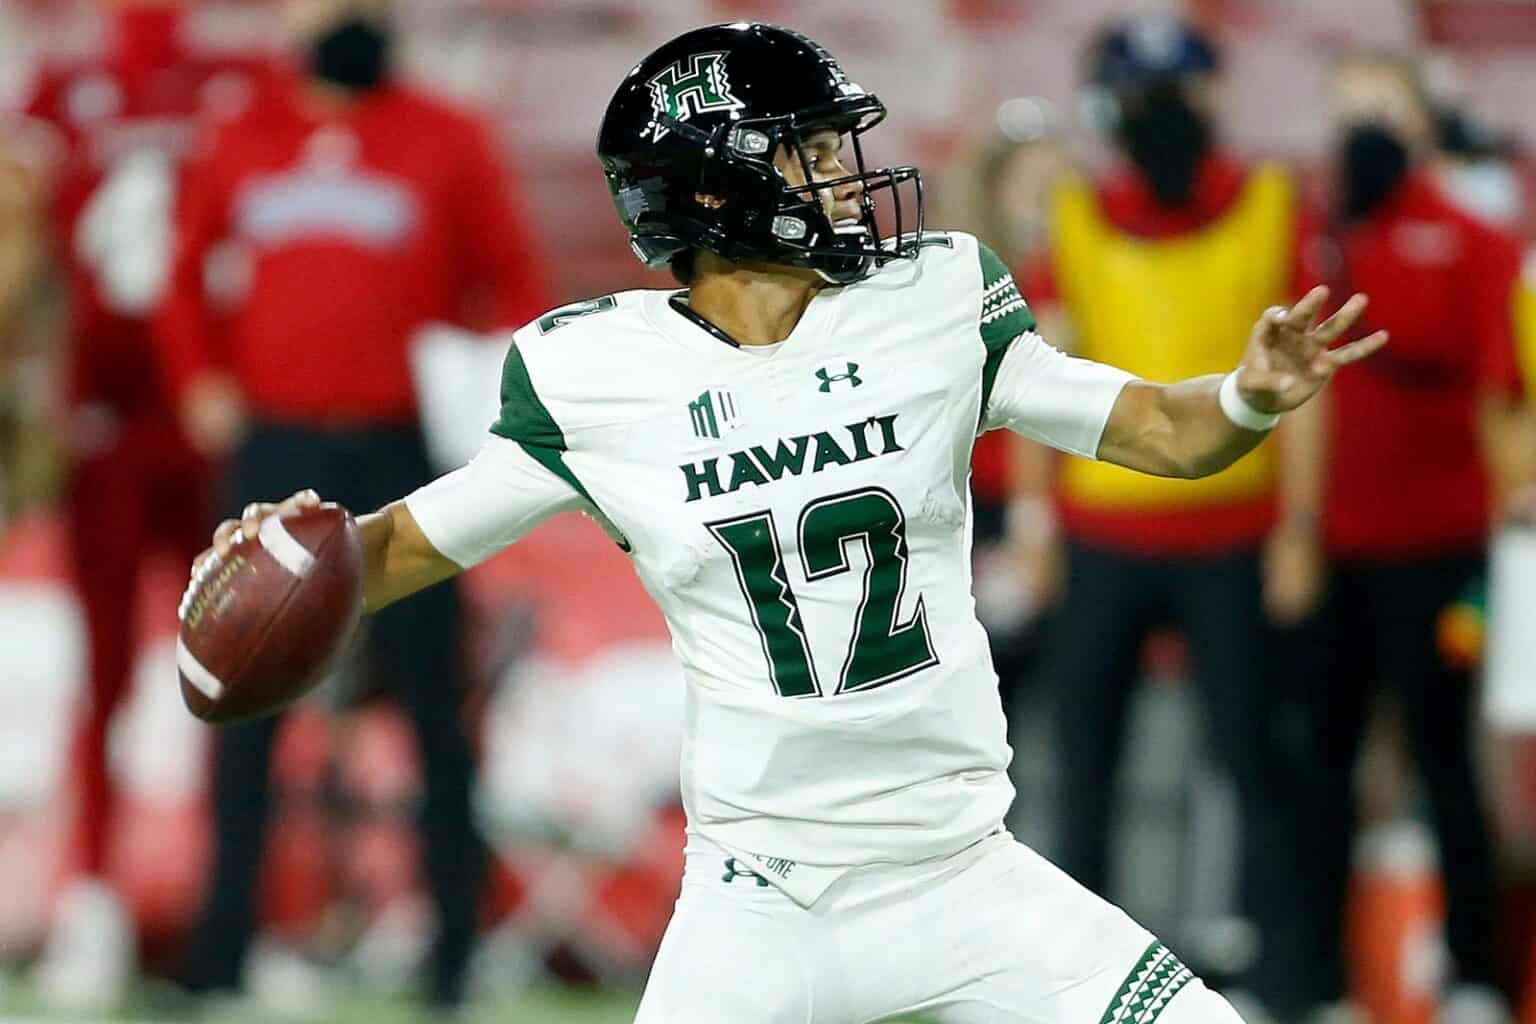 2020 Fordham at Hawaii football game rescheduled for 2028